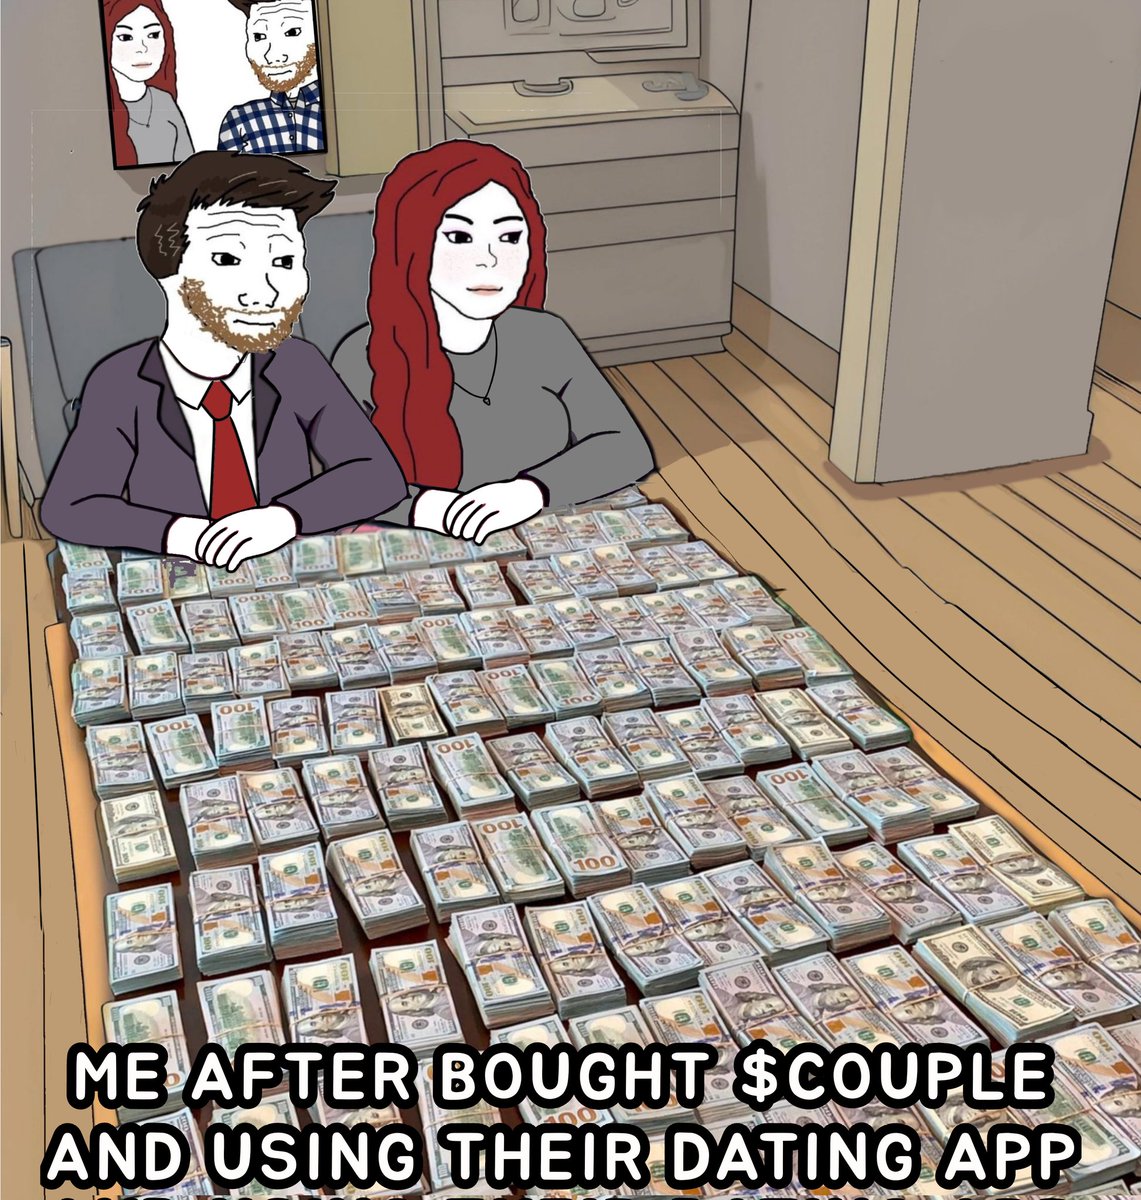 @bonk_inu Me after bought $COUPLE and use their dating app @couplejaksmeme has built the first dating app on $Sol whitelist at couplejacks.com to use the COUPLE dating app on $SOL #memecoin $COUPLE $Sol